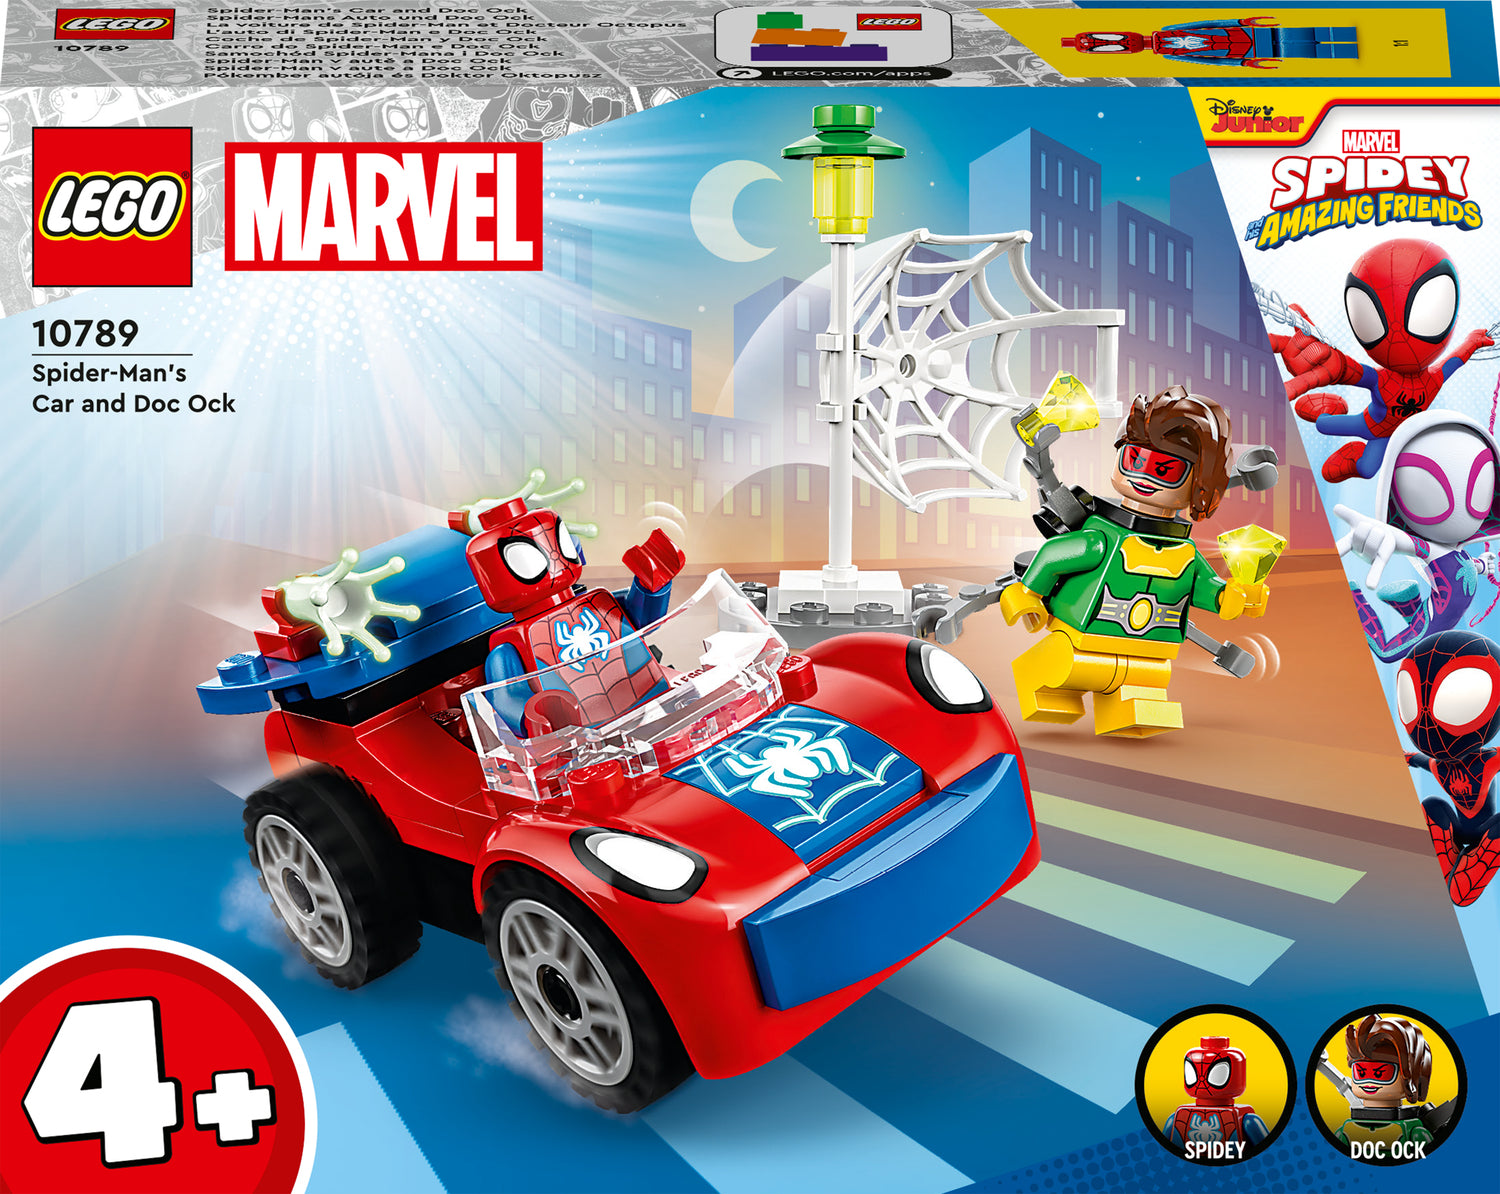 LEGO Super Heroes Spider-Man Figure 76226 by LEGO Systems Inc.